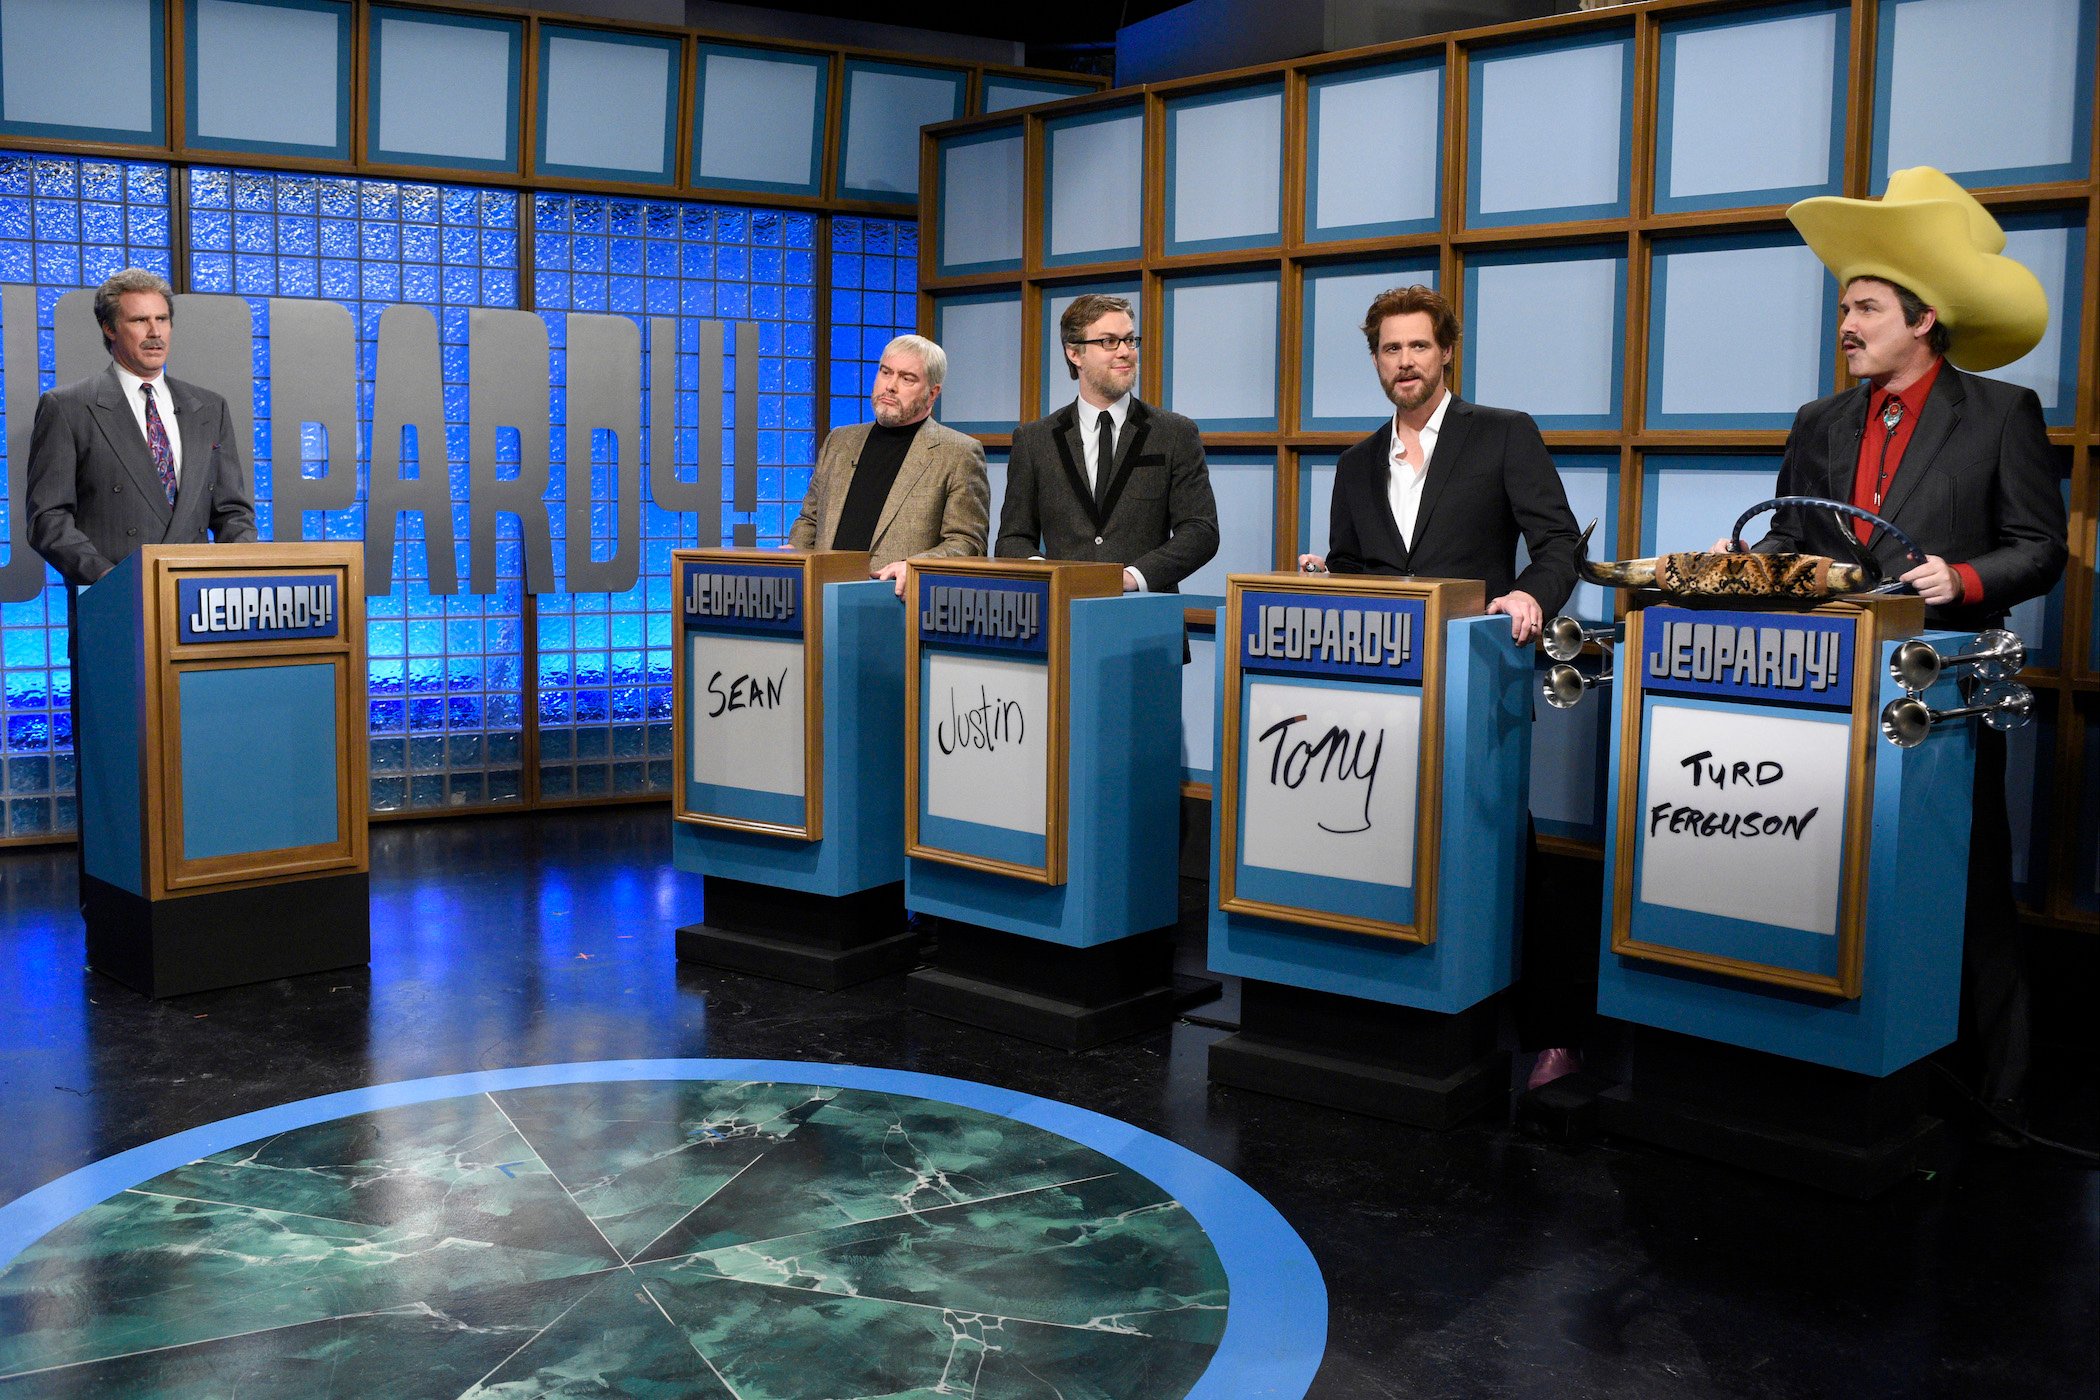 Will Ferrell as Alex Trebek in front of other comedians during the 'Celebrity Jeopardy!' skit. Norm Macdonald's Turd Ferguson on 'Jeopardy!' came from this skit